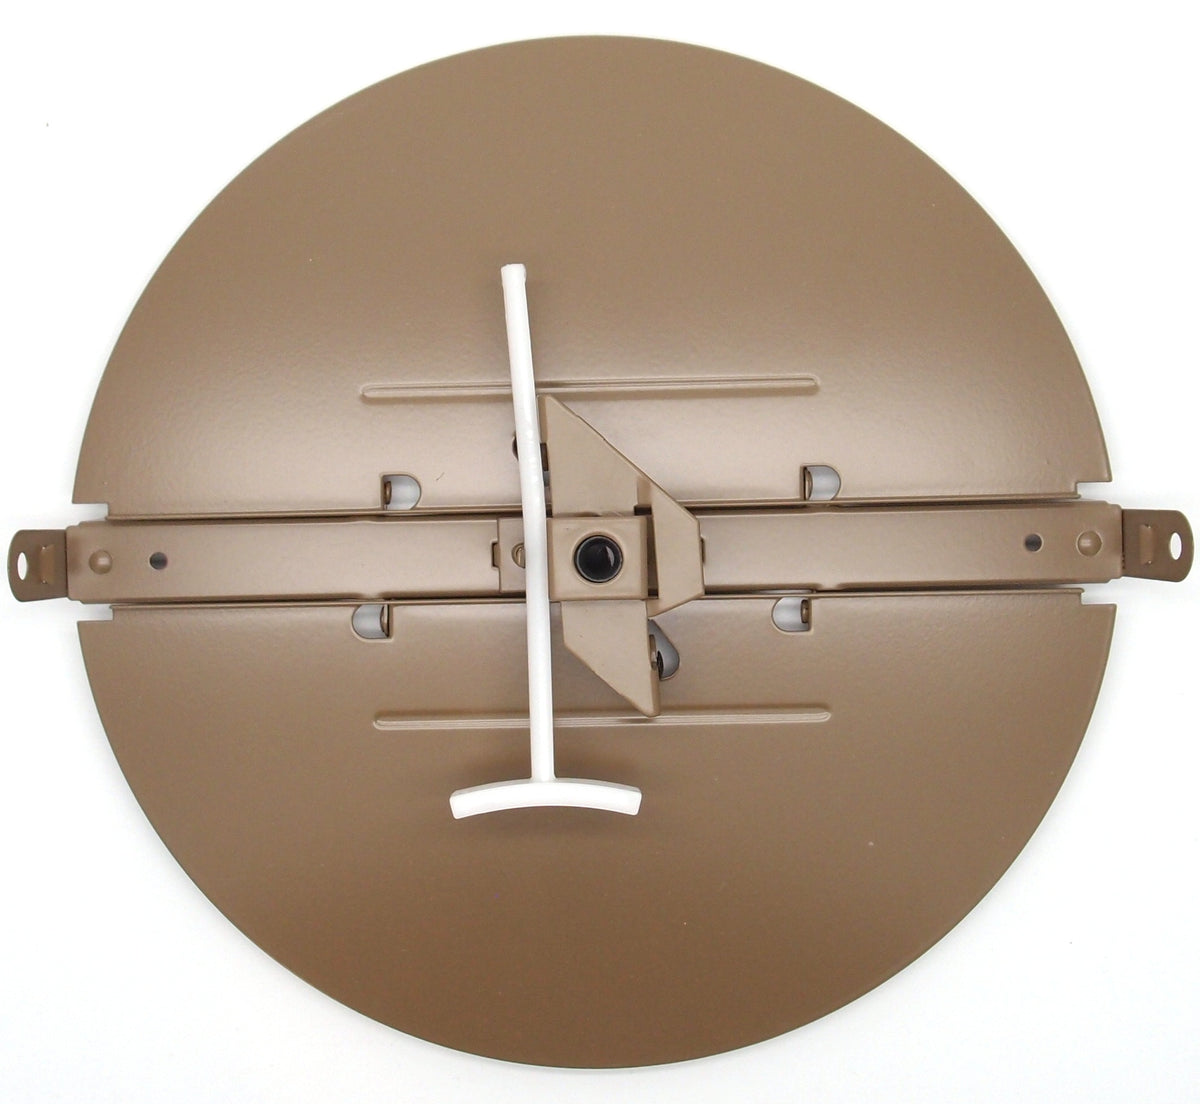 6&quot; BUTTERFLY DAMPER - For T-Bar, Drop Ceiling Grilles, Lay in Diffusers of 24x24 (6&quot; round duct opening)